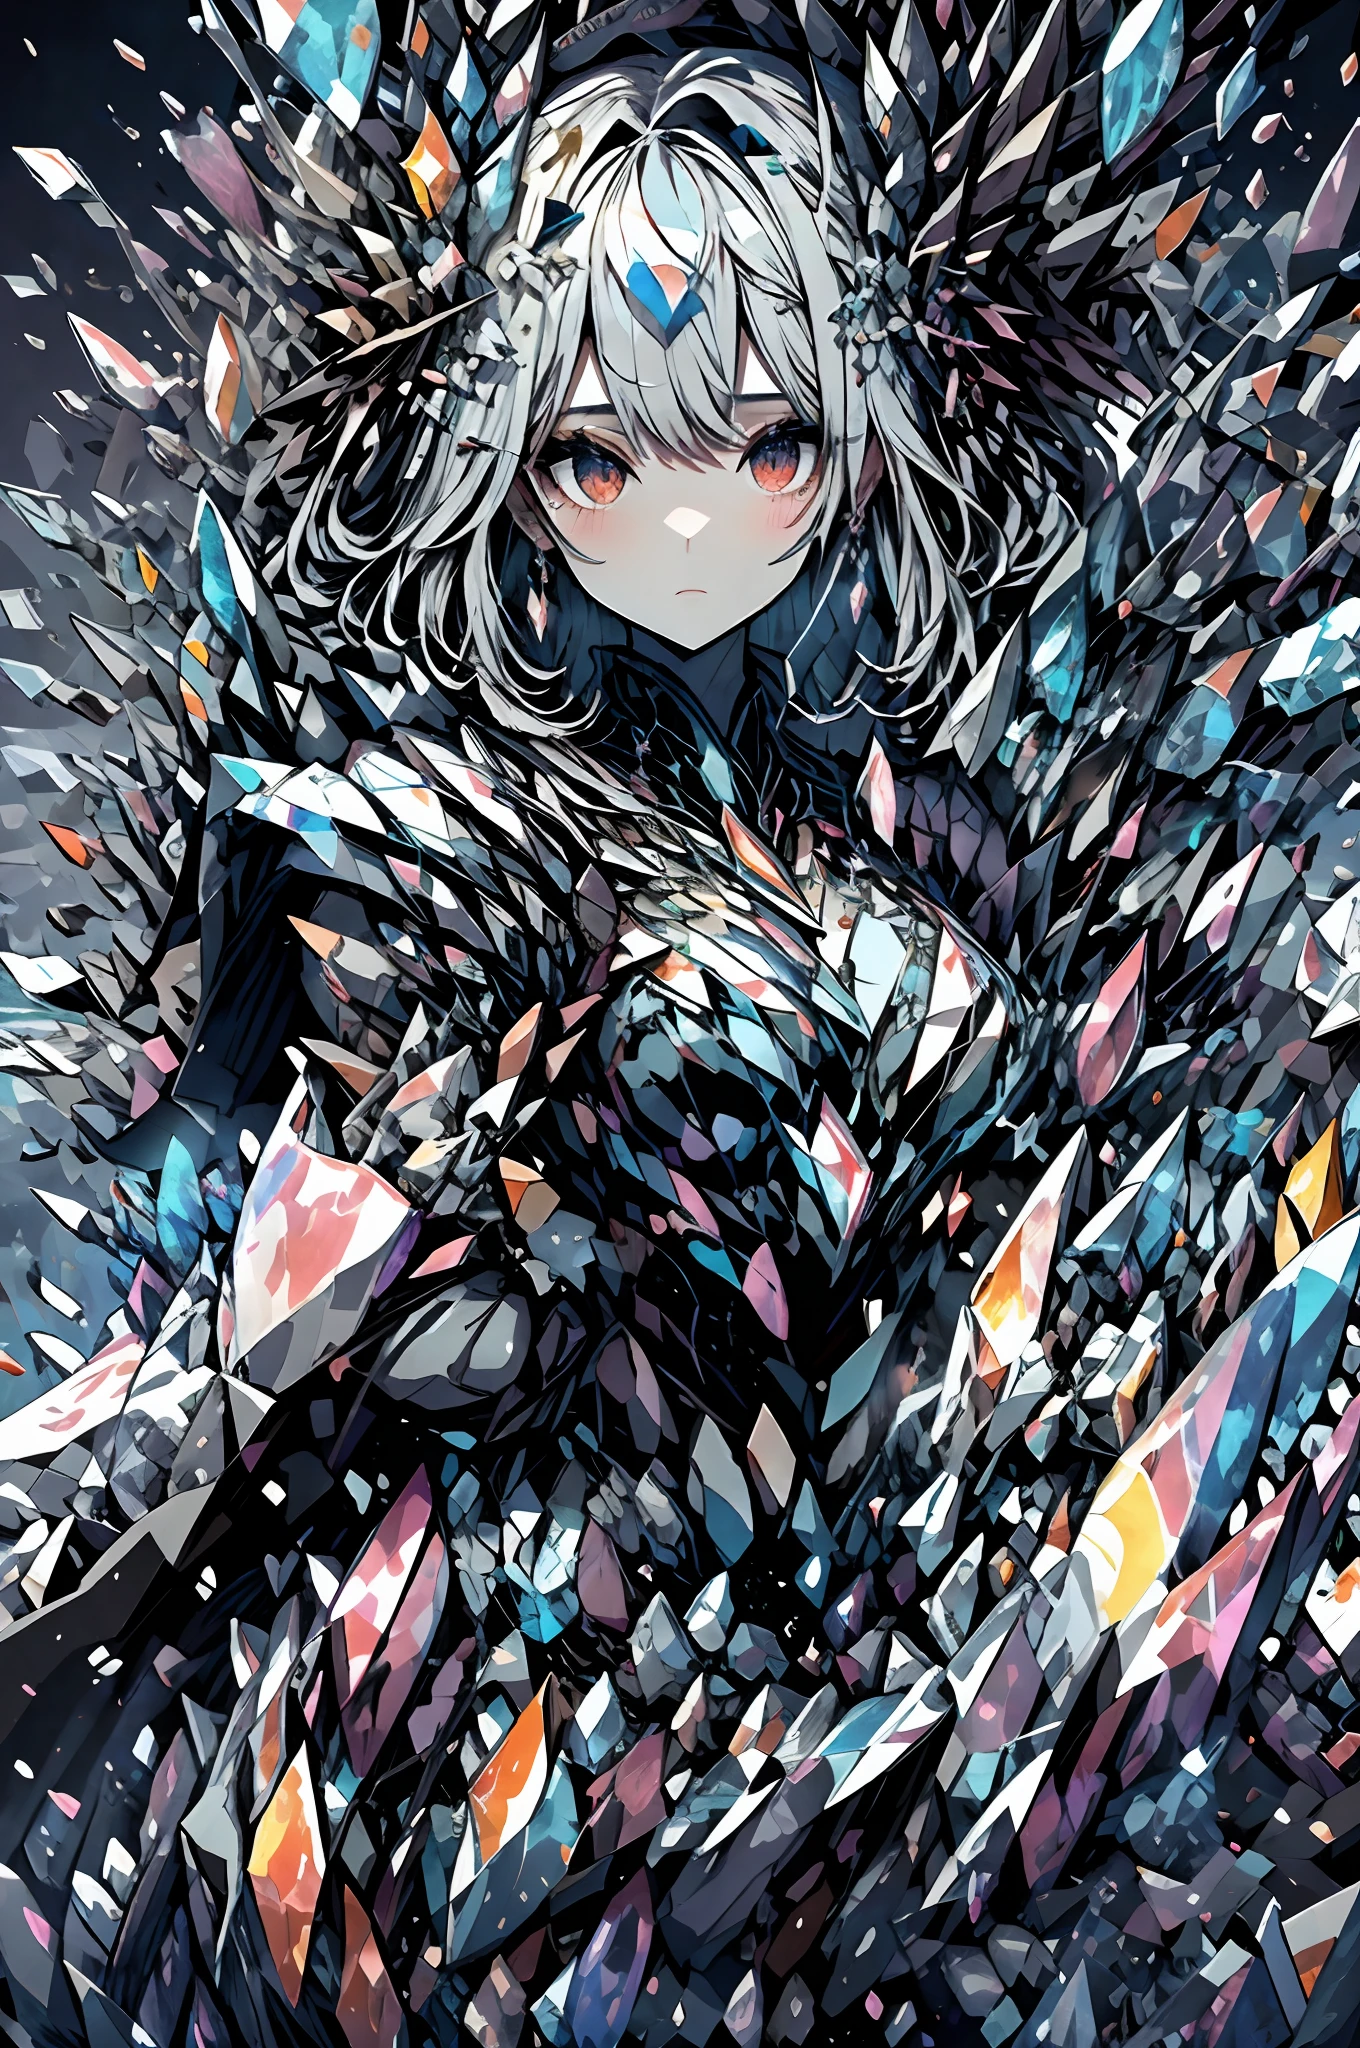 ​masterpiece, top-quality, hightquality, abyssal, This illustration is、It is a fantasy scene that combines a majestic atmosphere with romantic elements....。Woman in black armor、Stand in majestic and heavy armor。Her armor iade of transparent material like glass.、It is engraved with a beautiful pattern、Emphasis on armor texture。

however、The armor is partially powdered々It has become.、Powder々Shards of glass flutter around her。This symbolizes eternal struggle and loss.、It exudes a sense of sadness and romance at the same time。The woman's expression is、It reflects the deep contemplation and memory of the past.、It expresses her inner complexity。

Powder々Became a shard of glass、Swaying in the wind、Beautiful brilliance in the night sky。This adds a fantastic and romantic element.、It gives the whole scene a mystical atmosphere。Female Warrior and Powder々By crossing the dance of the glass that became,、Past and present、It expresses the moment when reality and fantasy intersect。

This illustration is、Armor powder like glass々will be、It depicts a fantasy world where tragedy and romantic elements are fused。